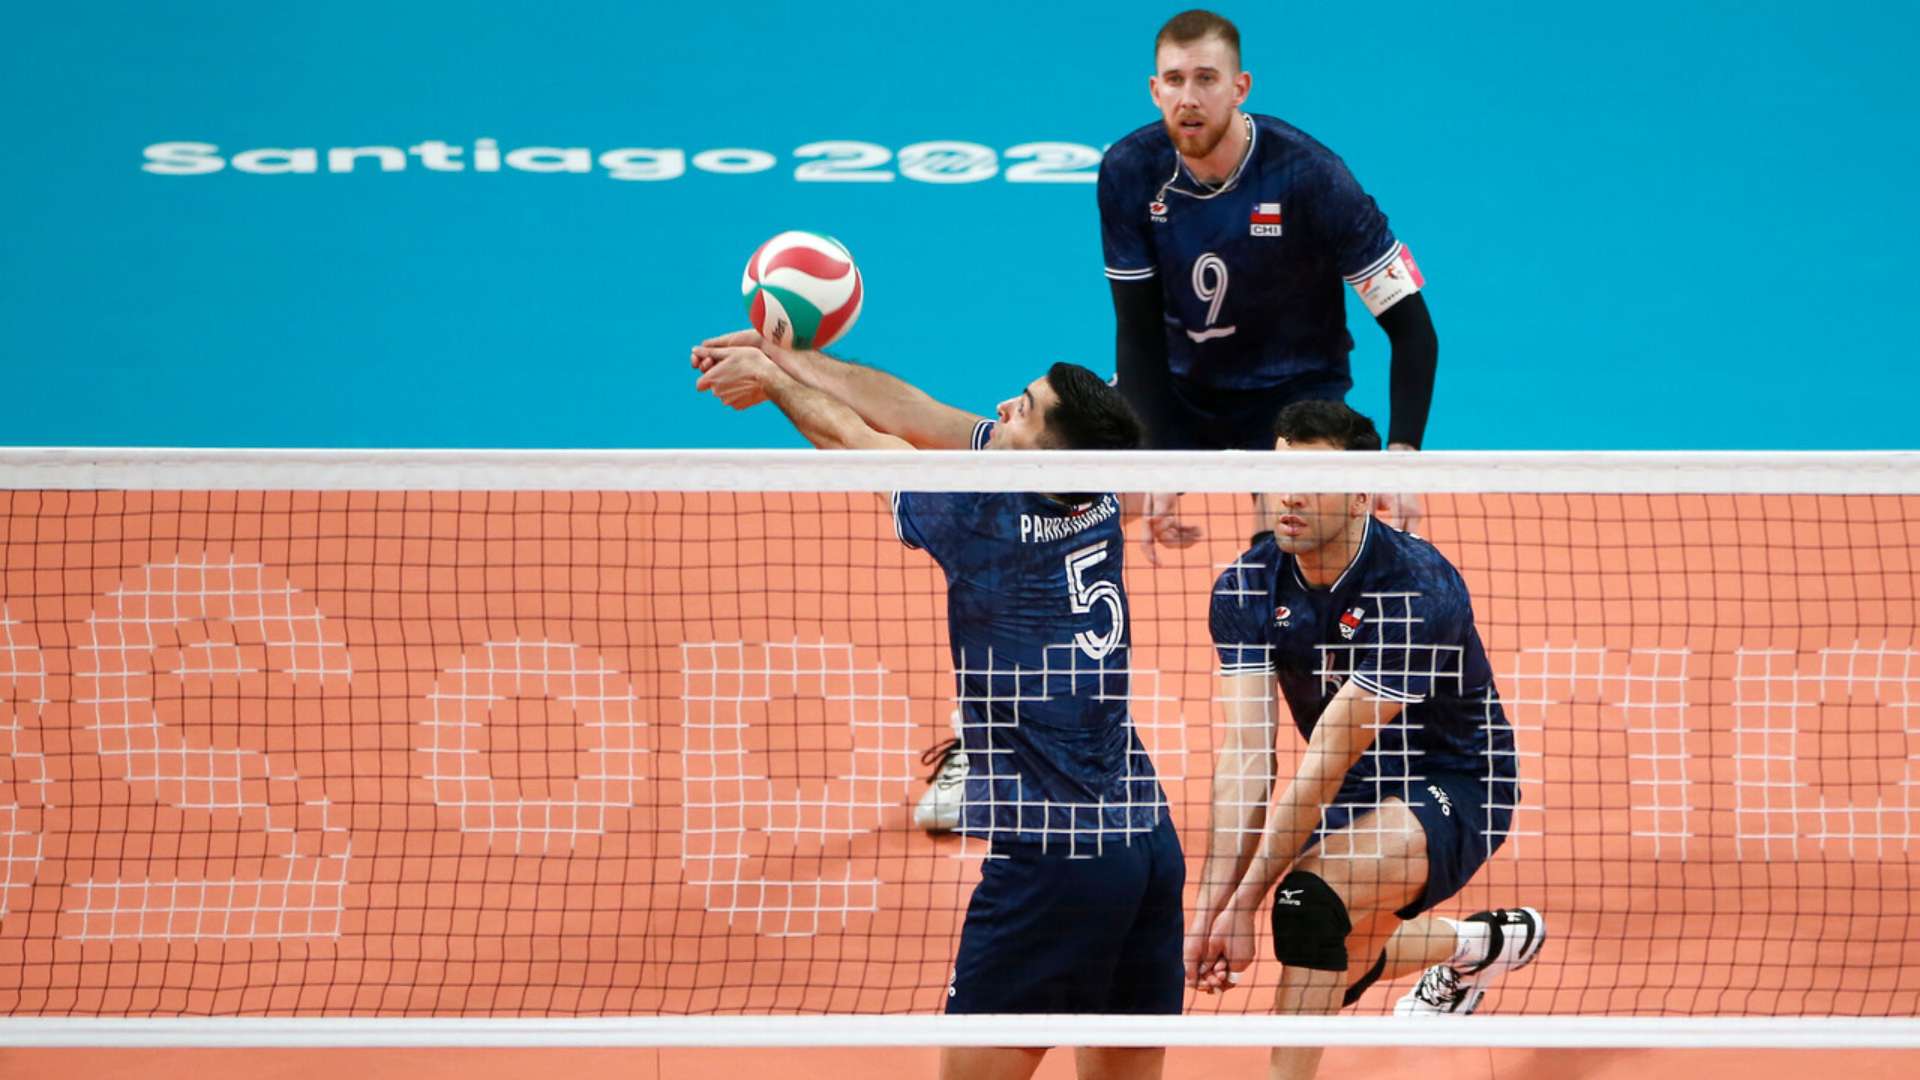 Chile secures quarter-finals in male's volleyball